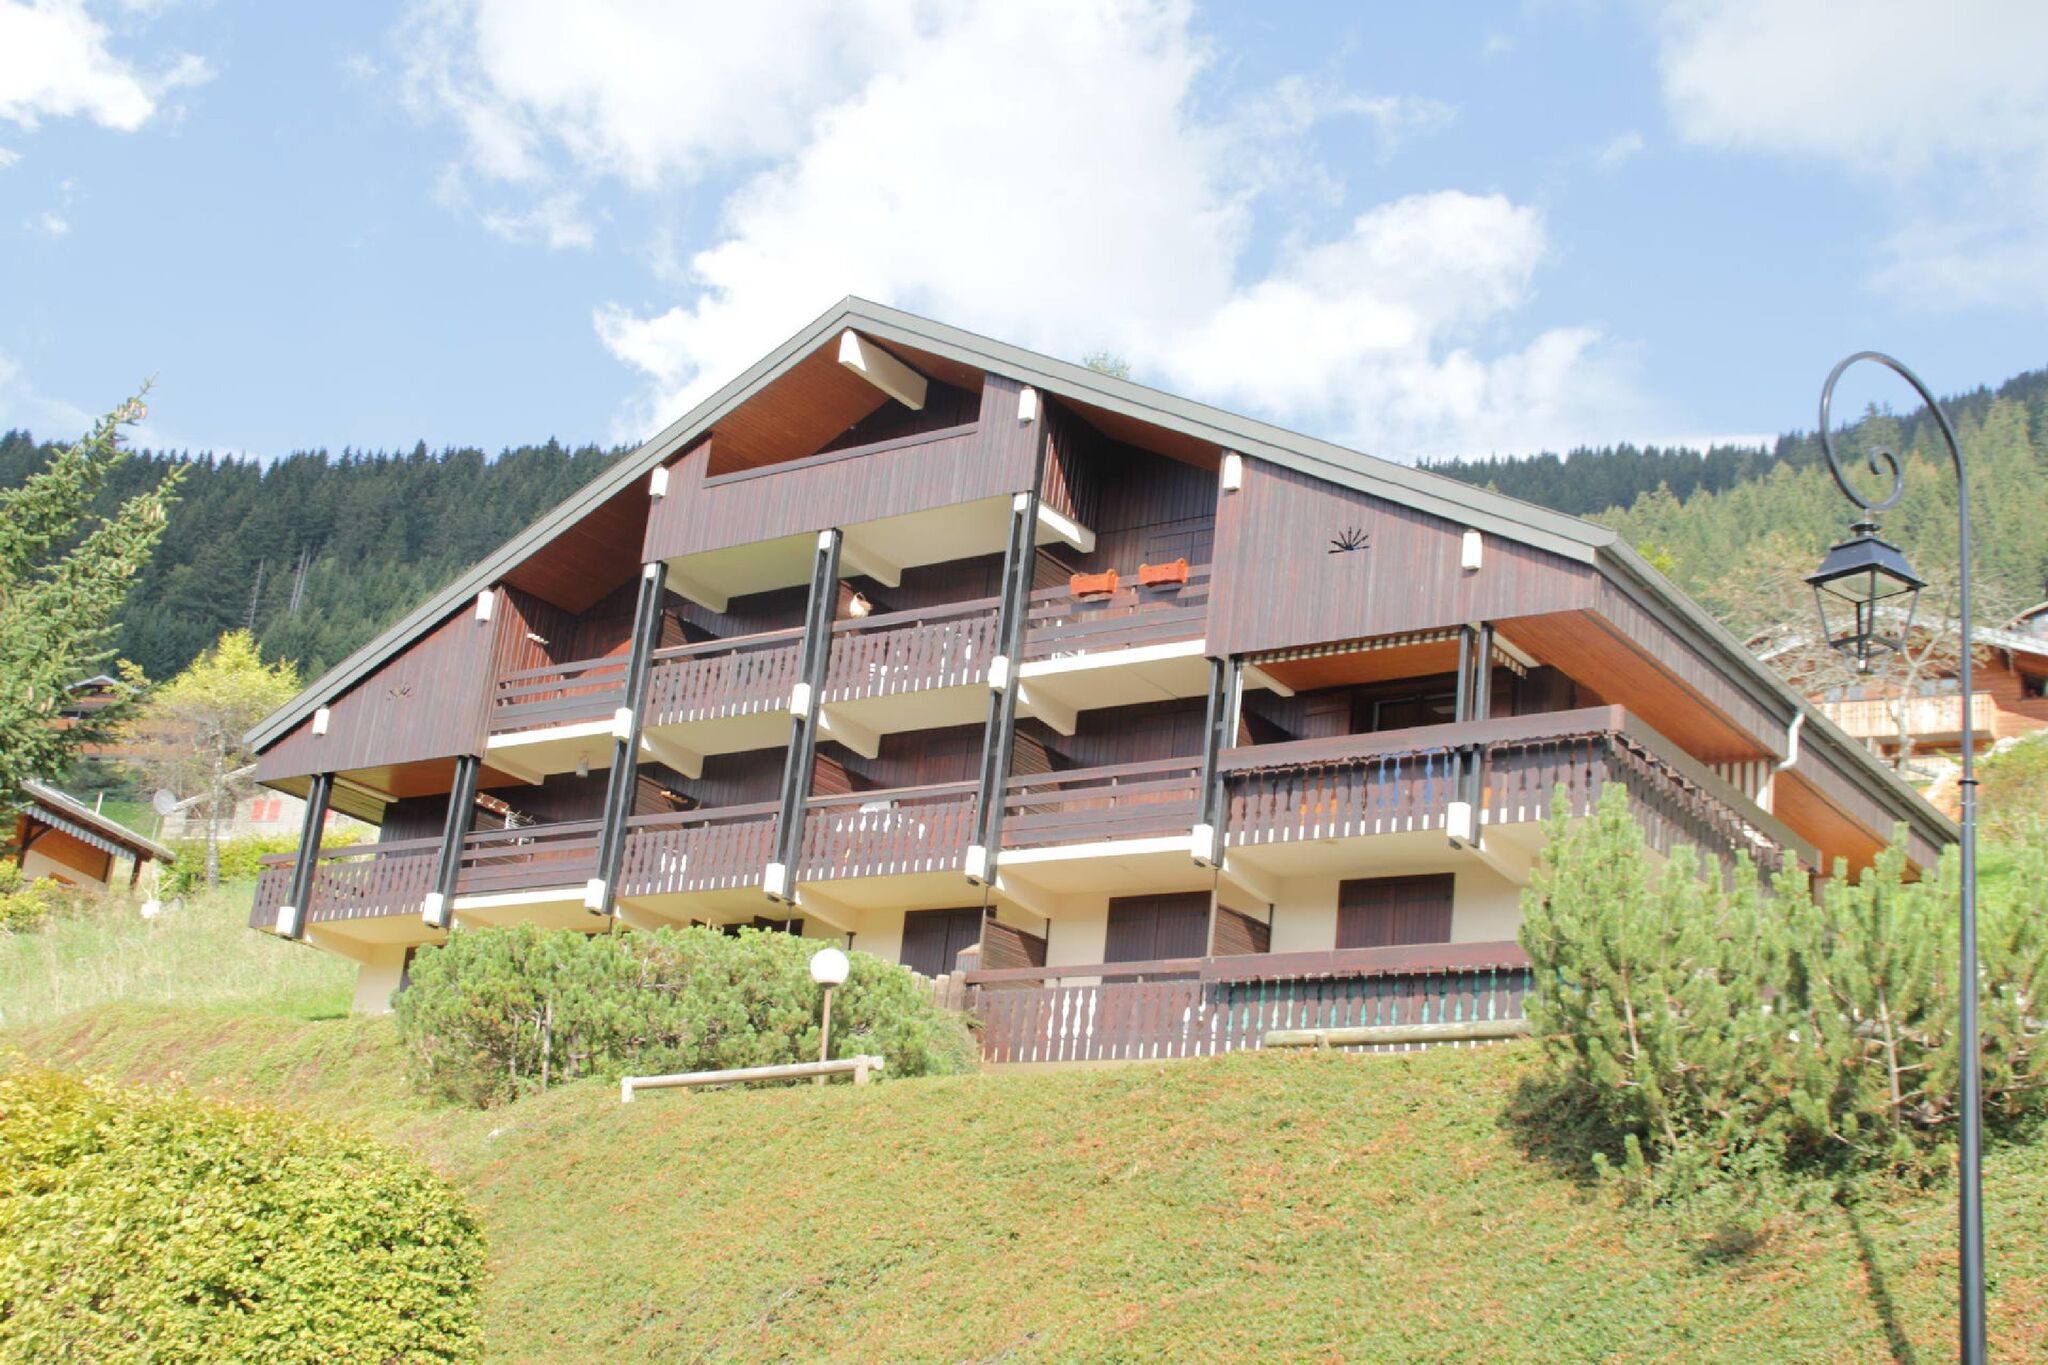 Valley-View apartment located only 600 meters from the ski lifts